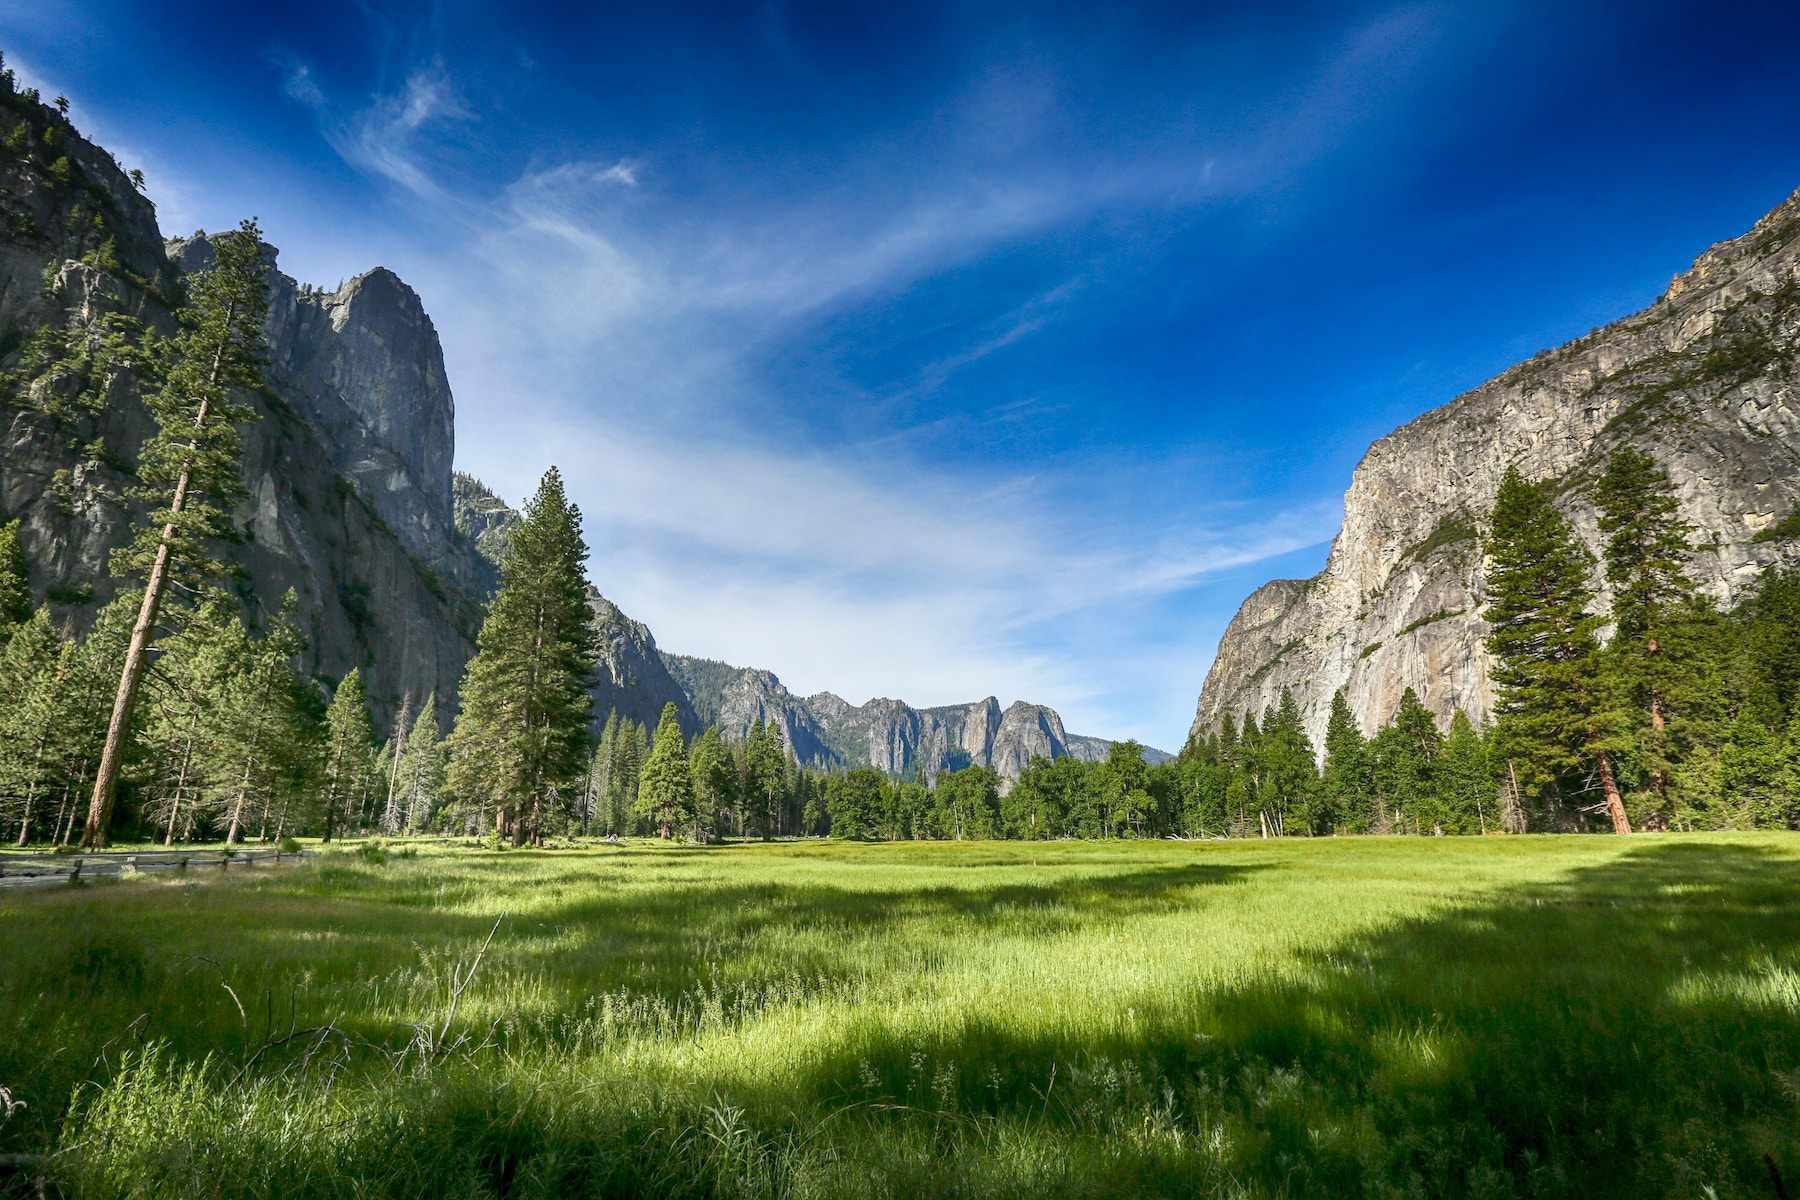 Is Yosemite still doing ticketed entry?